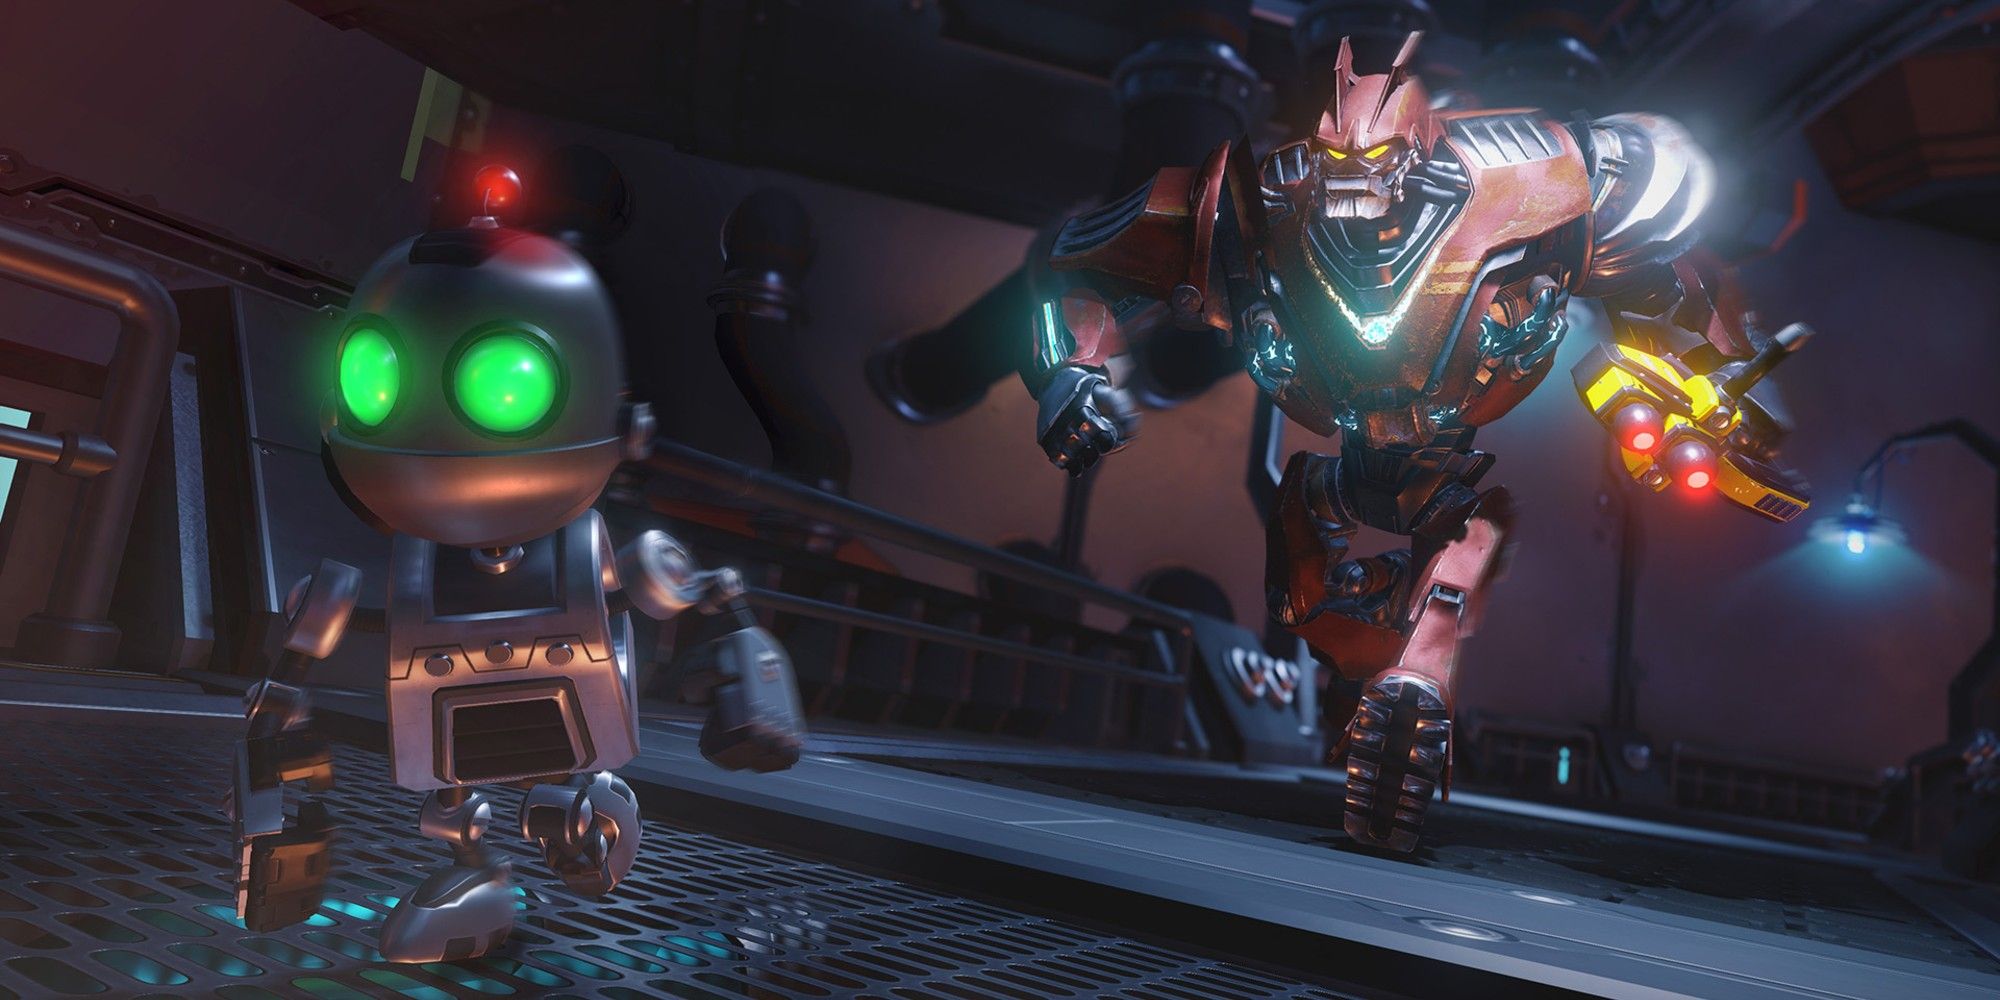 Clank running away from a giant robotic enemy in Ratchet & Clank